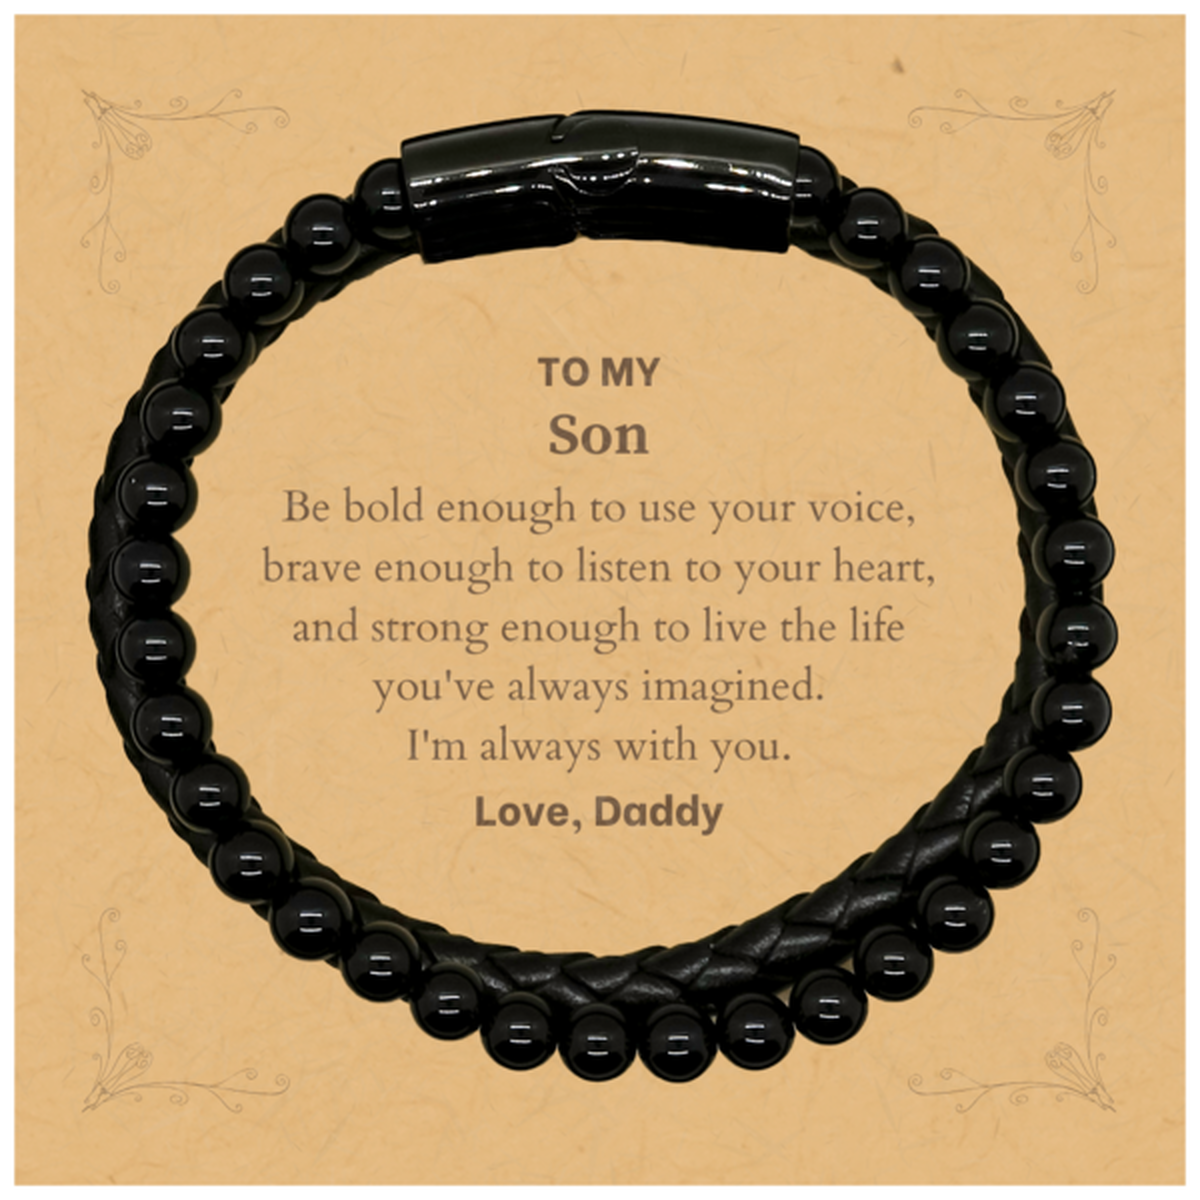 Keepsake Son Stone Leather Bracelets Gift Idea Graduation Christmas Birthday Son from Daddy, Son Be bold enough to use your voice, brave enough to listen to your heart. Love, Daddy